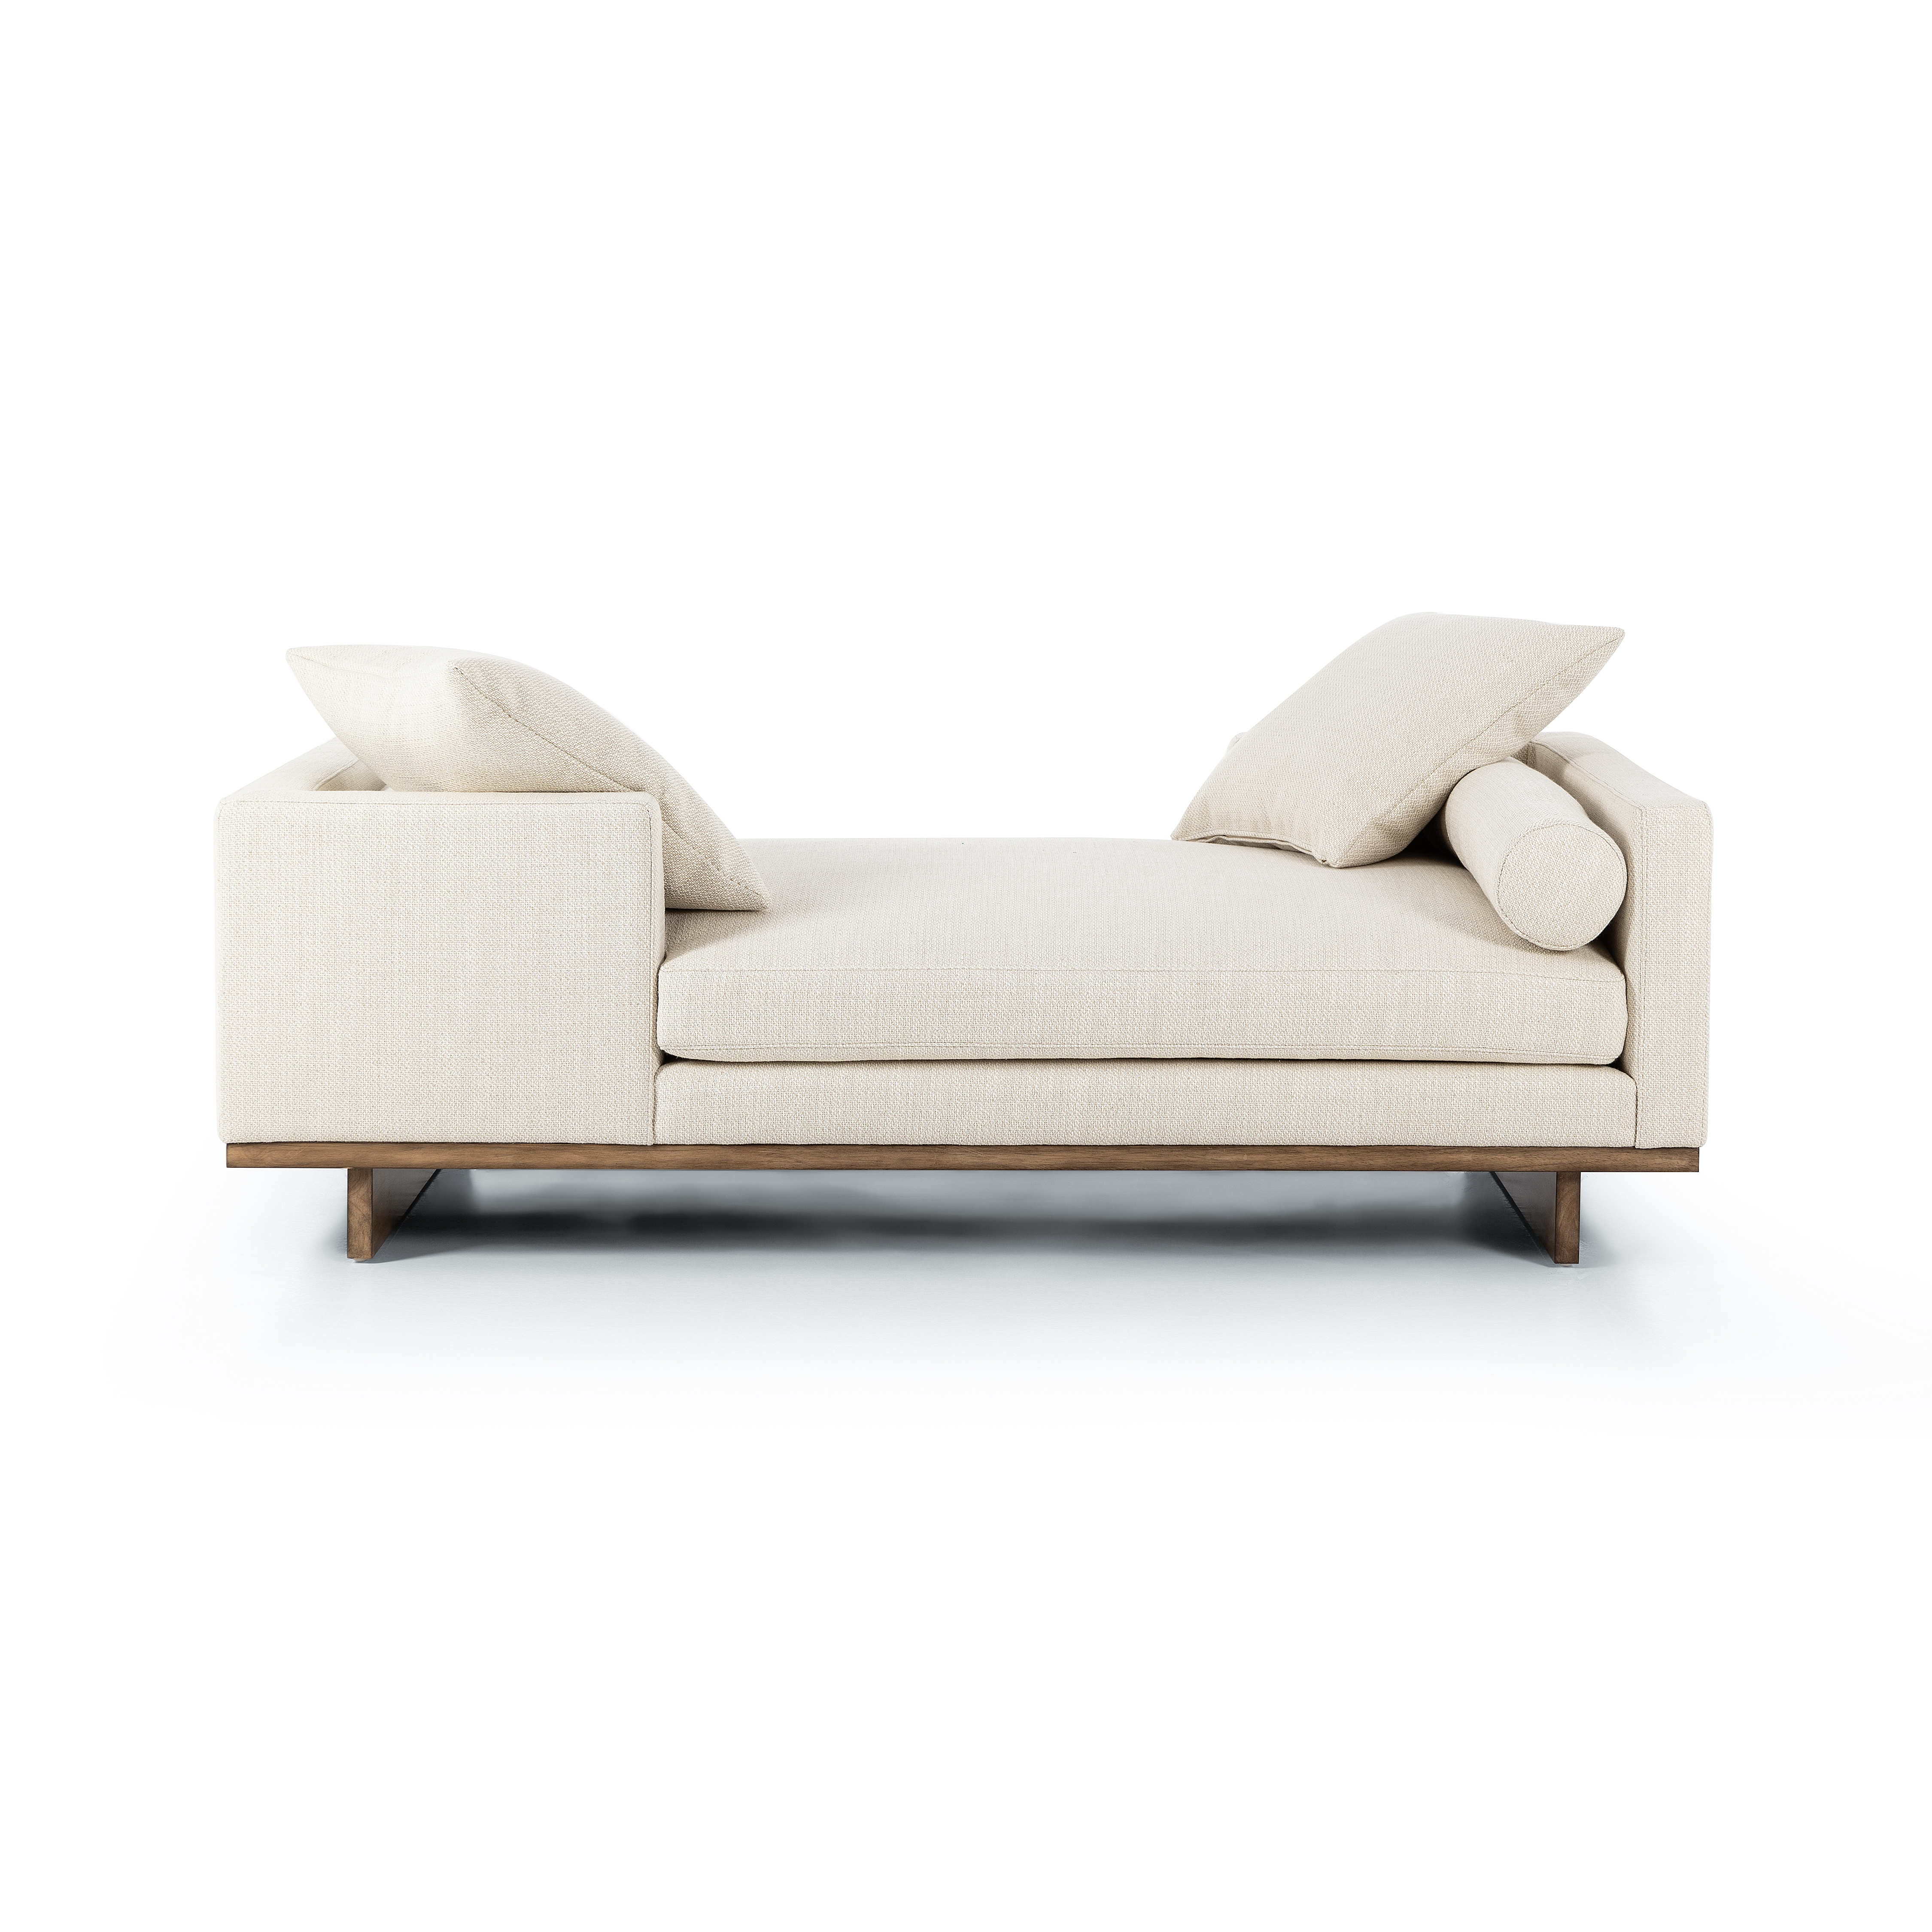 Everly Tete A Tete Chaise-Irving Taupe - Image 3